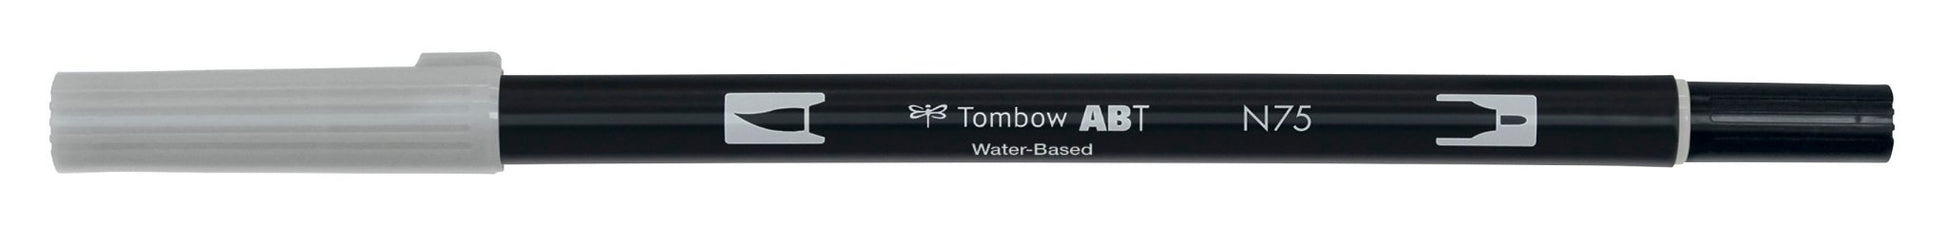 Tombow ABT dual brush pen - single colours - Tombow - Cool gray 3 ABT-N75 - millenotes